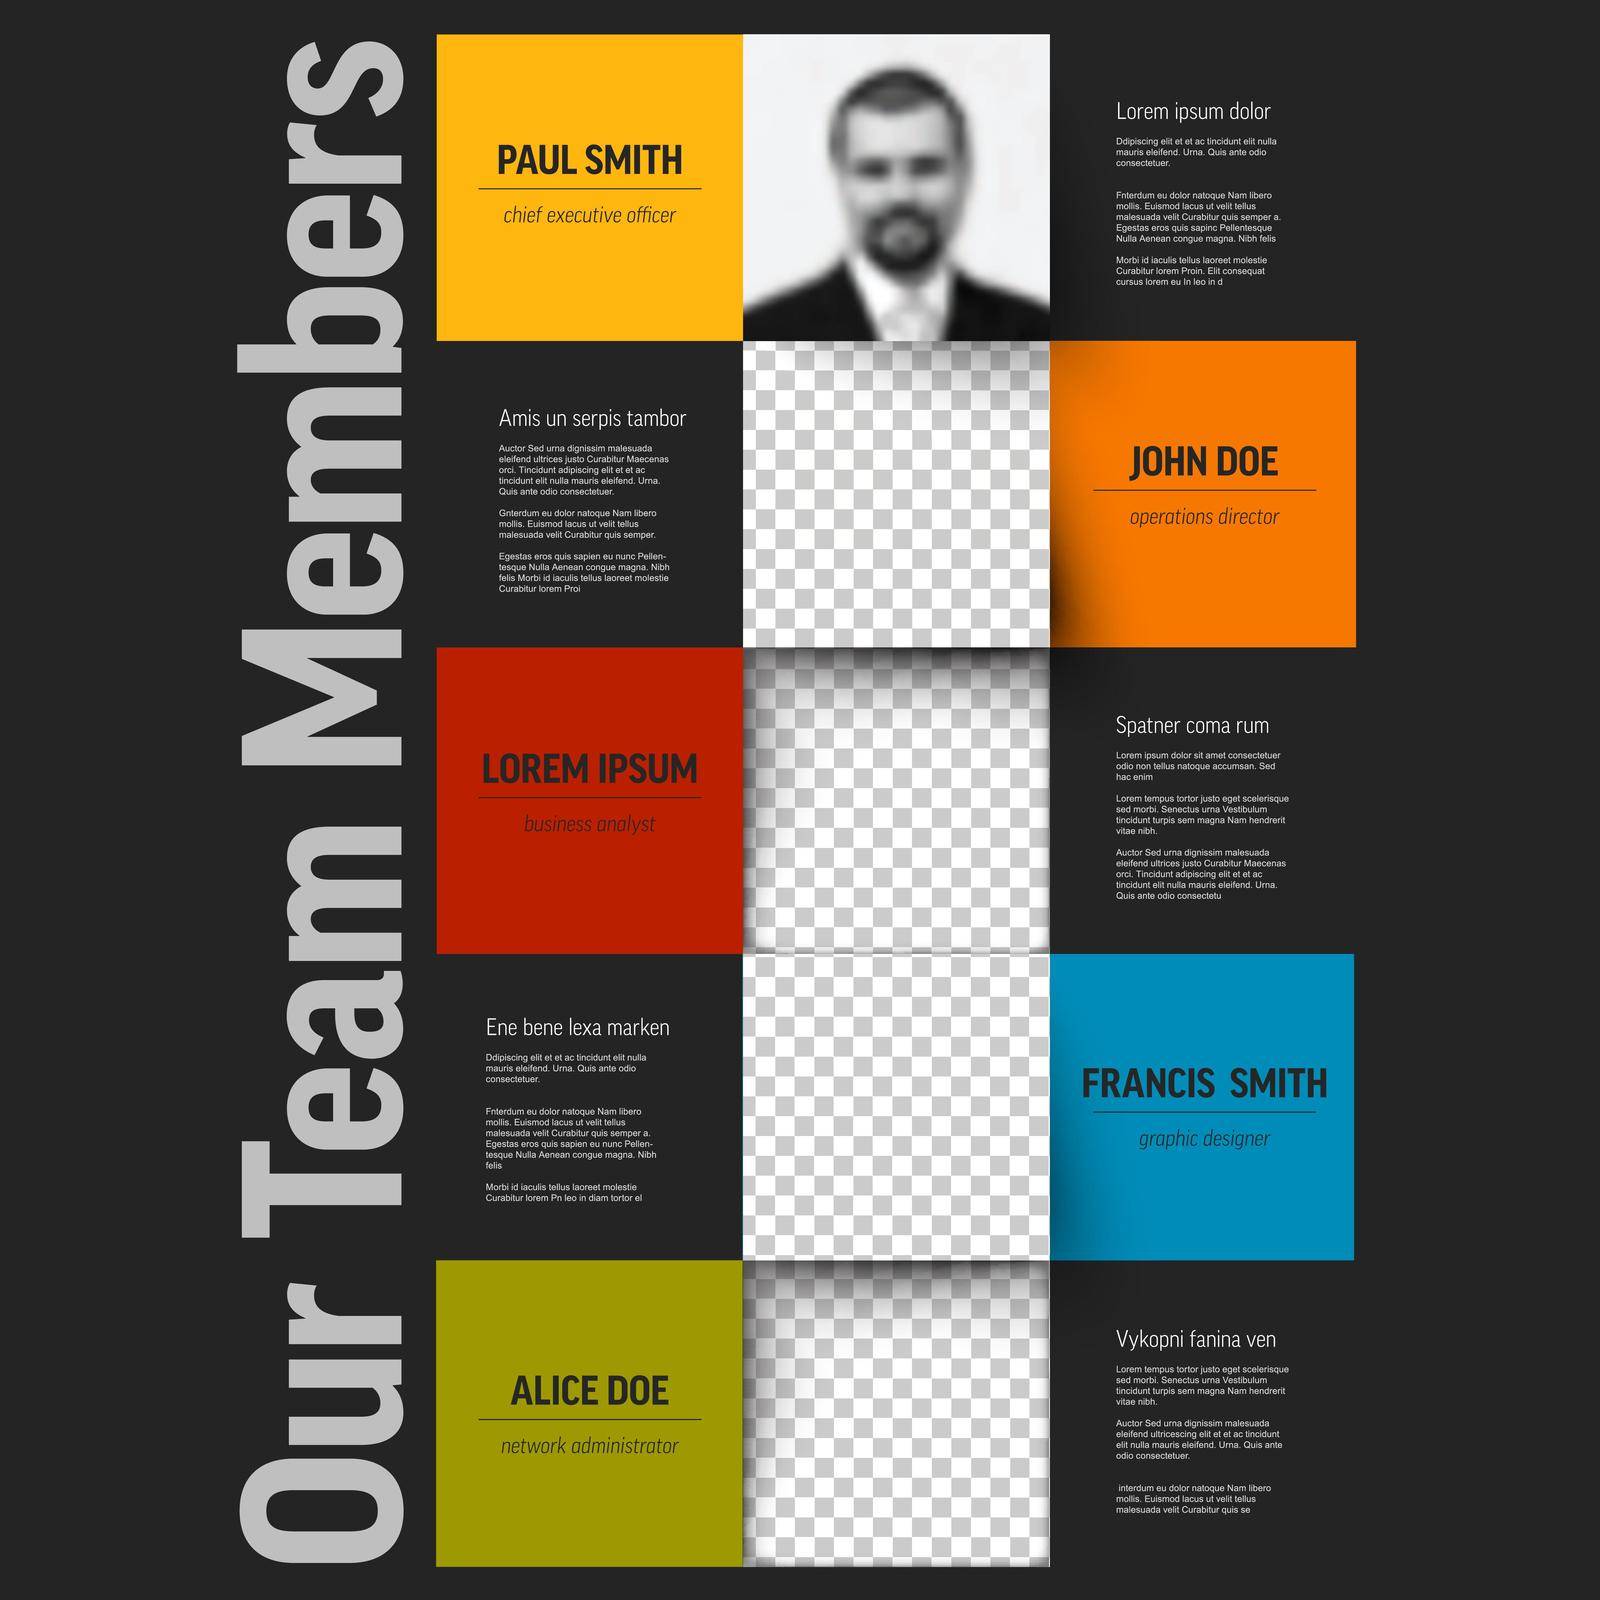 Company team members dark color mosaic presentation template with team profile photos placeholders and some sample text about each team member - solid mosaic version with team photos